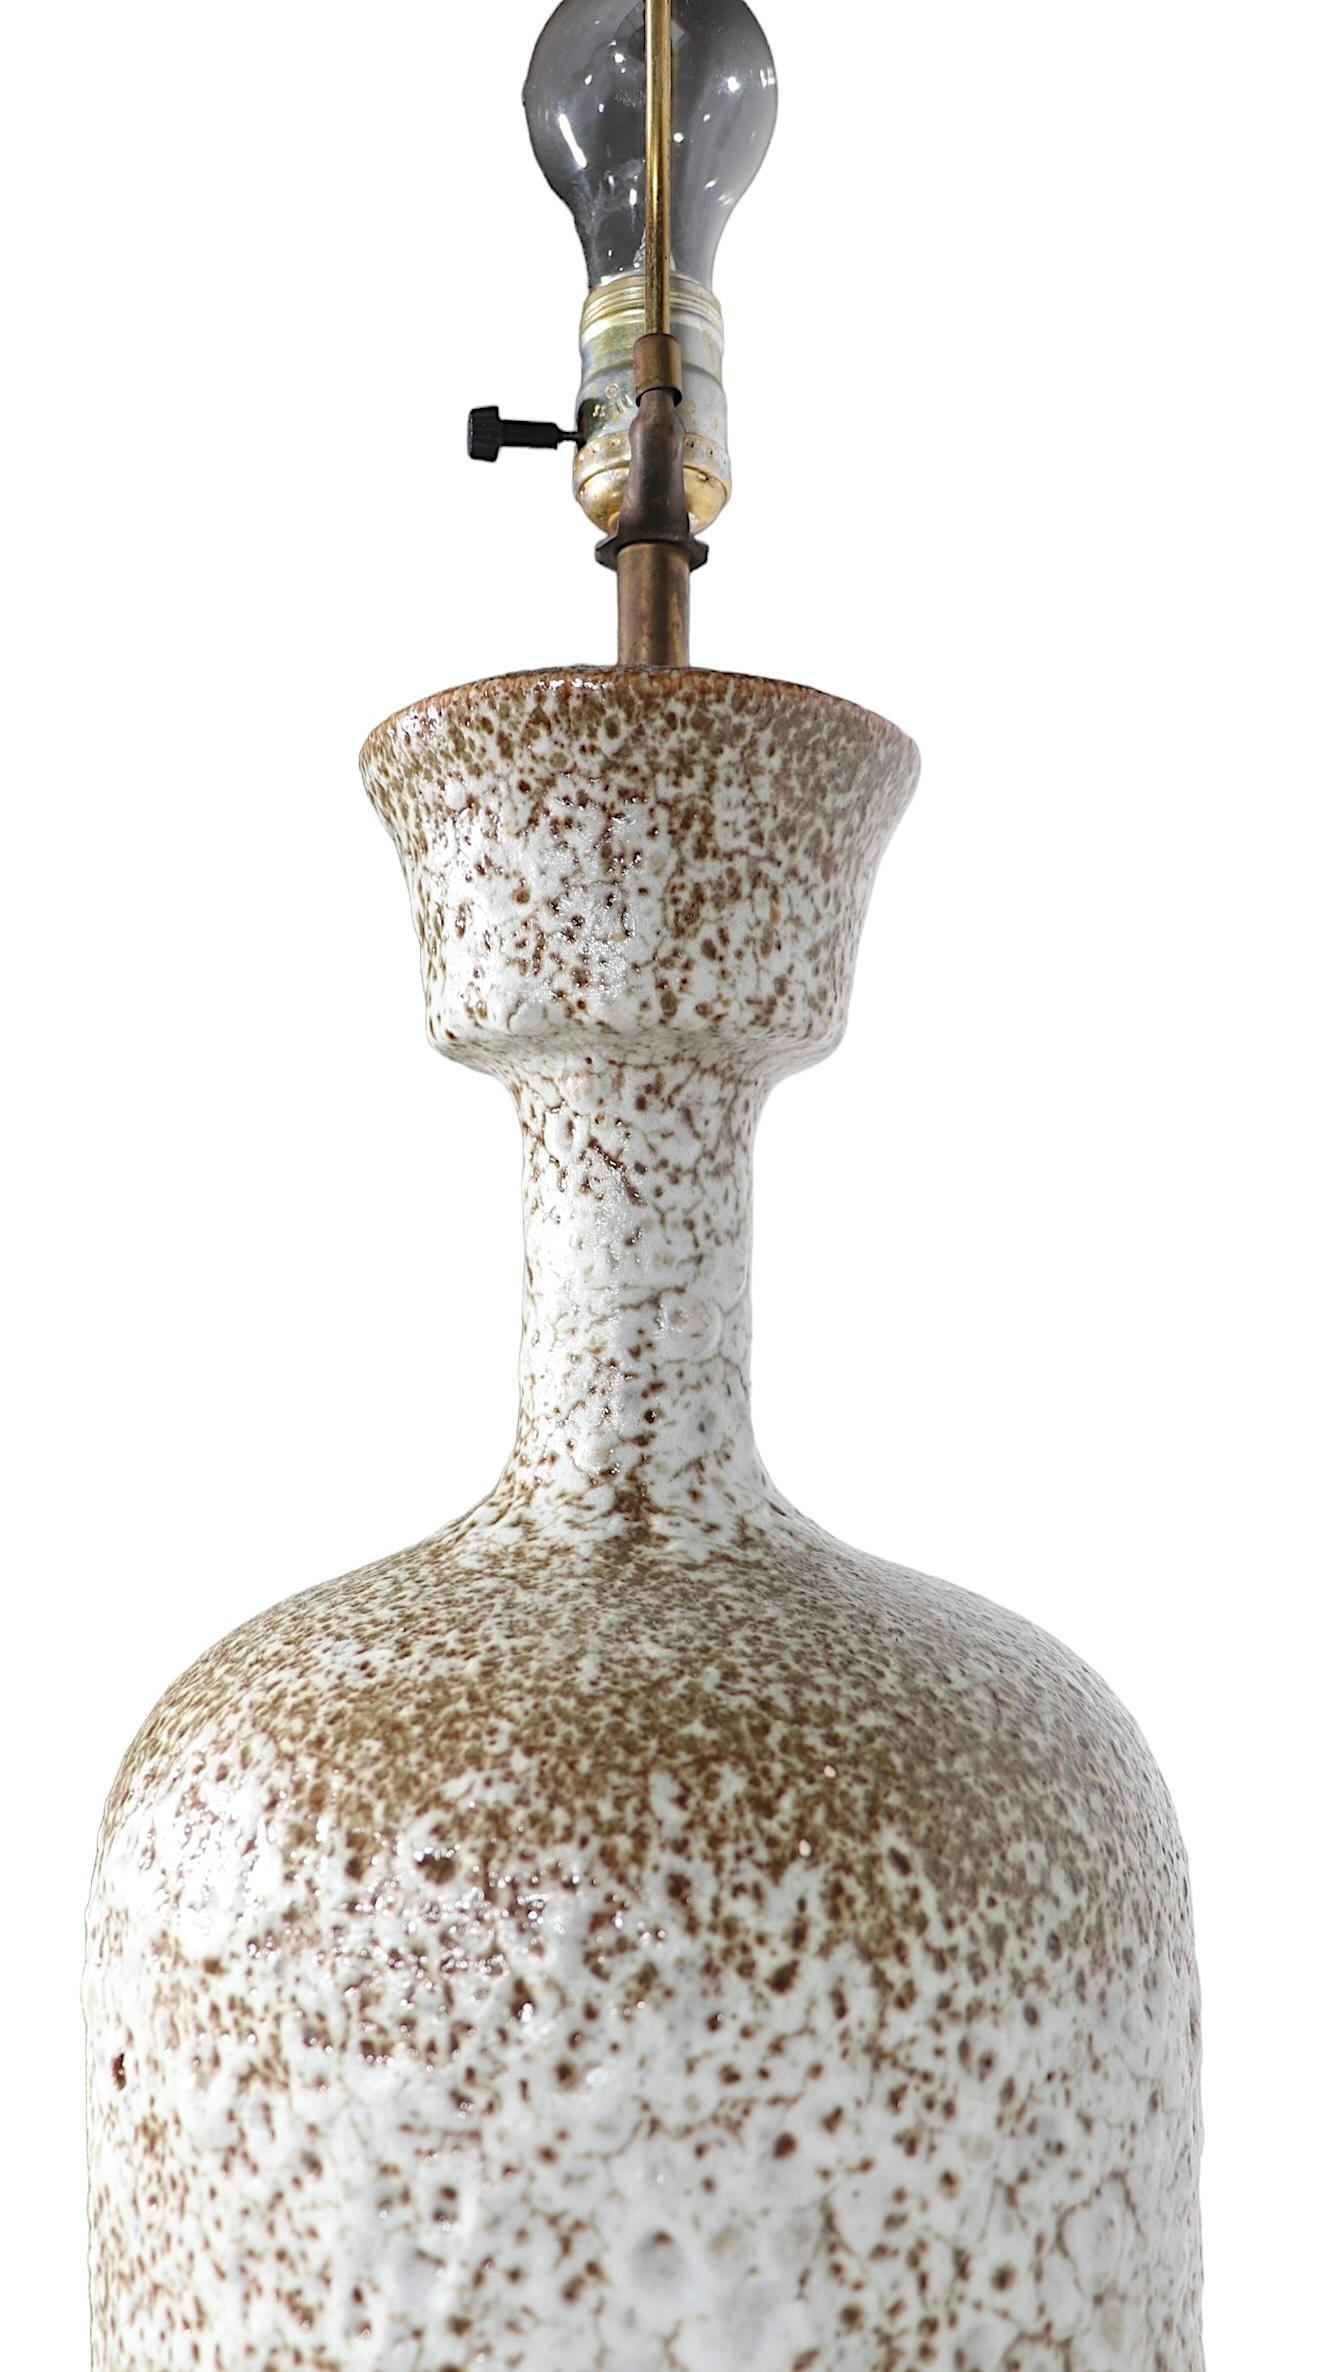 Oversize Hollywood Regency Mid Century Volcanic Glaze Table Lamp c 1950/1960's In Good Condition For Sale In New York, NY